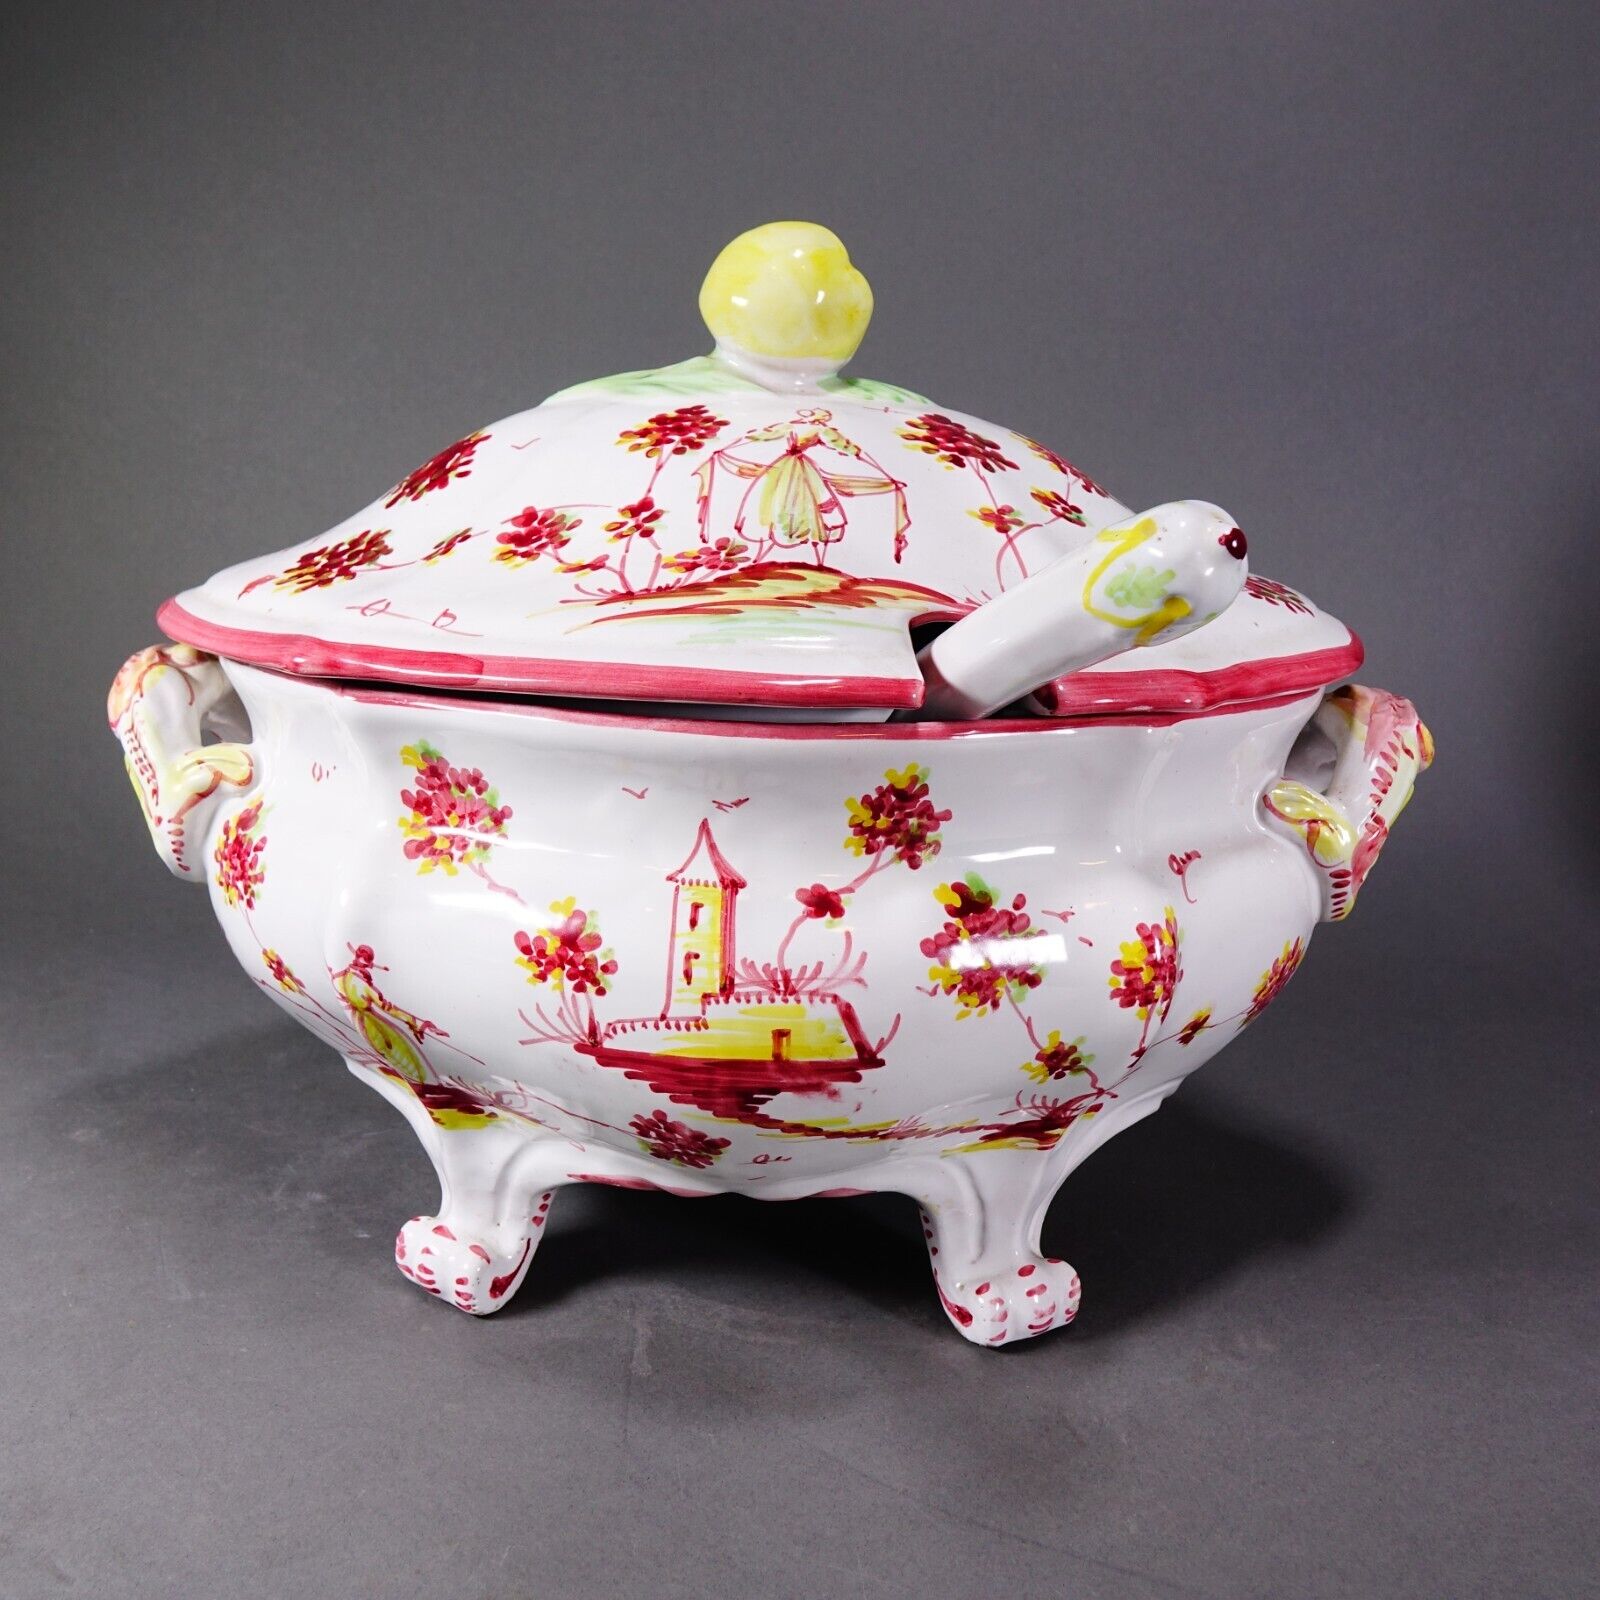 French Porcelain Footed Soup Tureen with Ladel Spoon